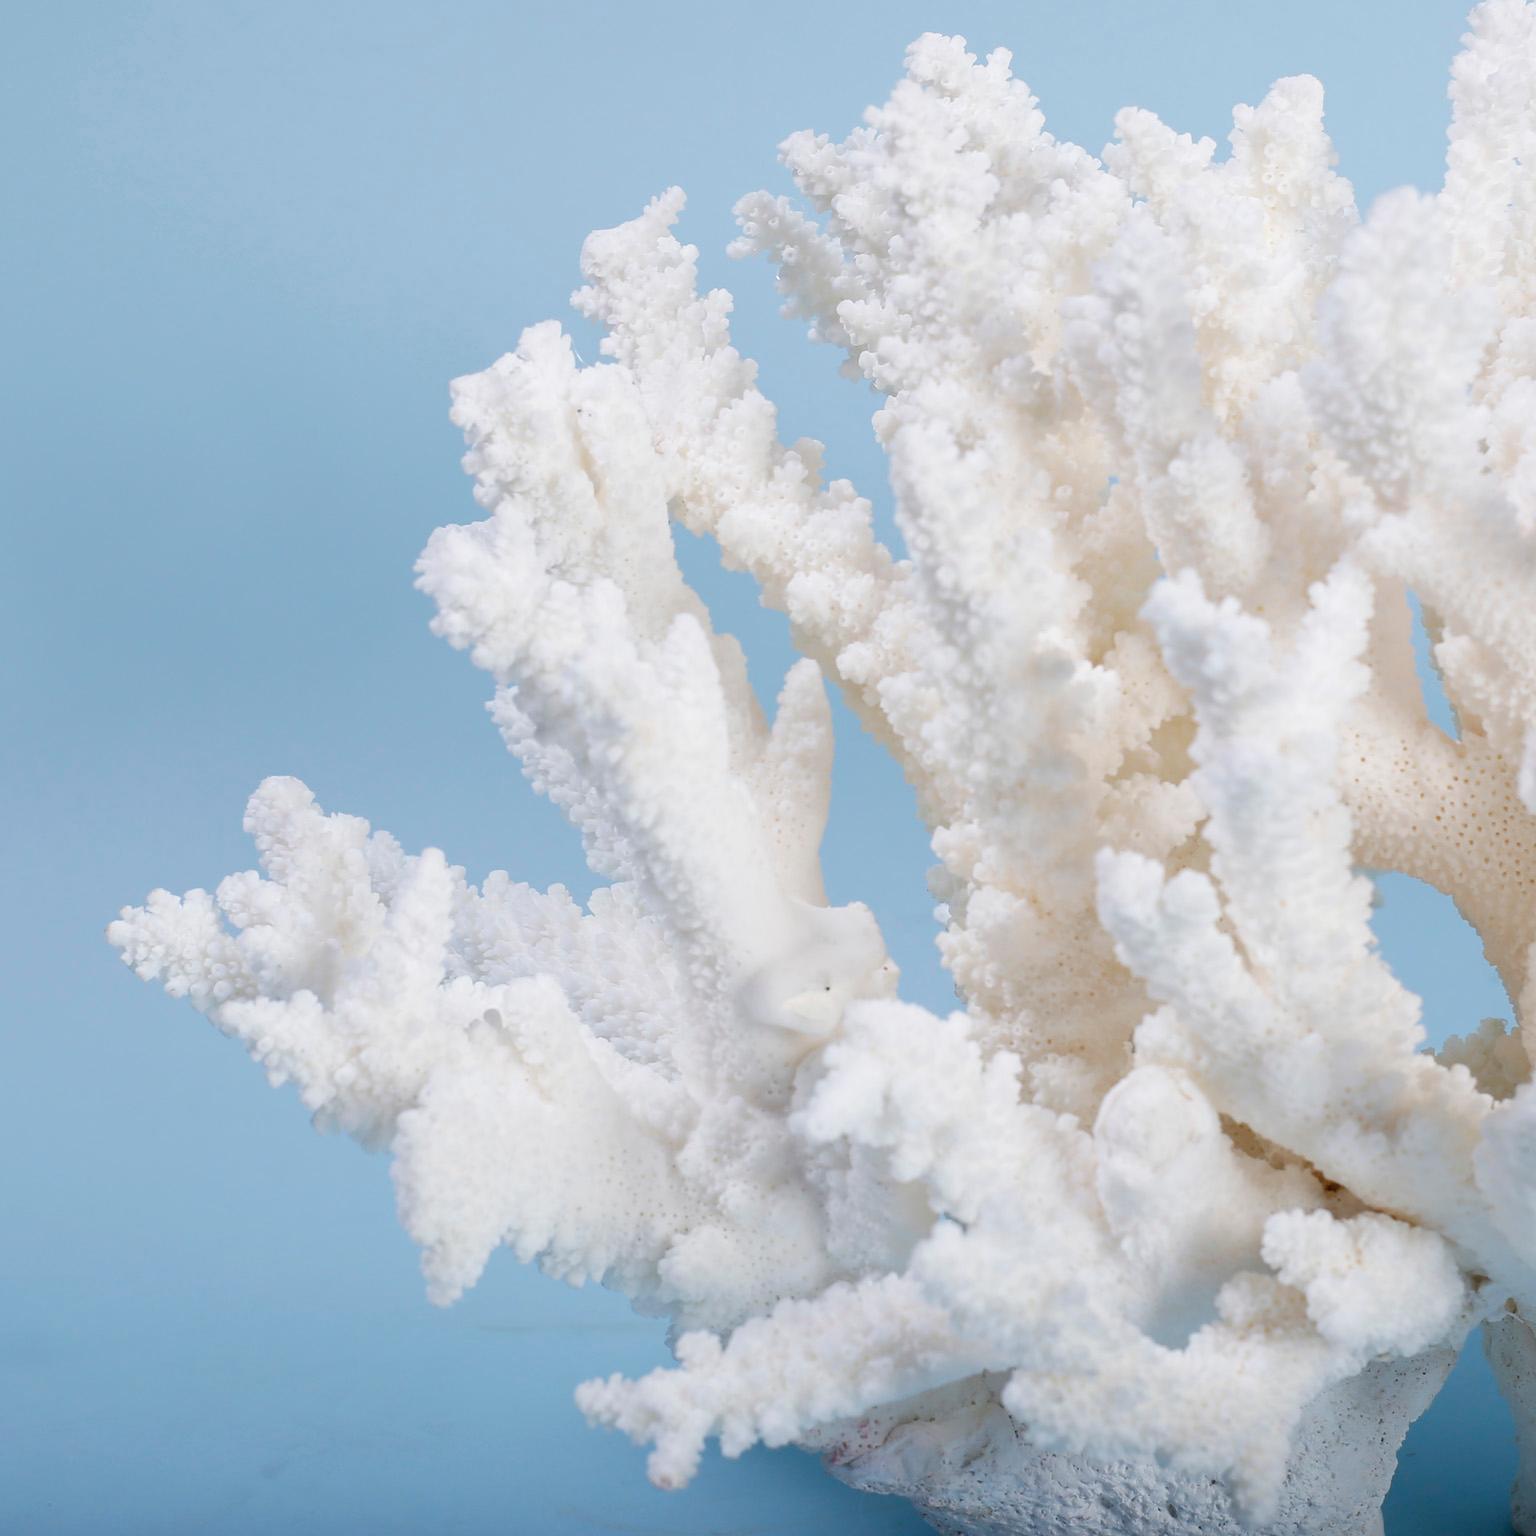 Stand out branch coral sculpture designed and crafted by F. S. Henemader with authentic regulated coral featuring sea inspired texture, organic forms, and brilliant bleached white color. 

Coral being exported outside of the USA, requires special